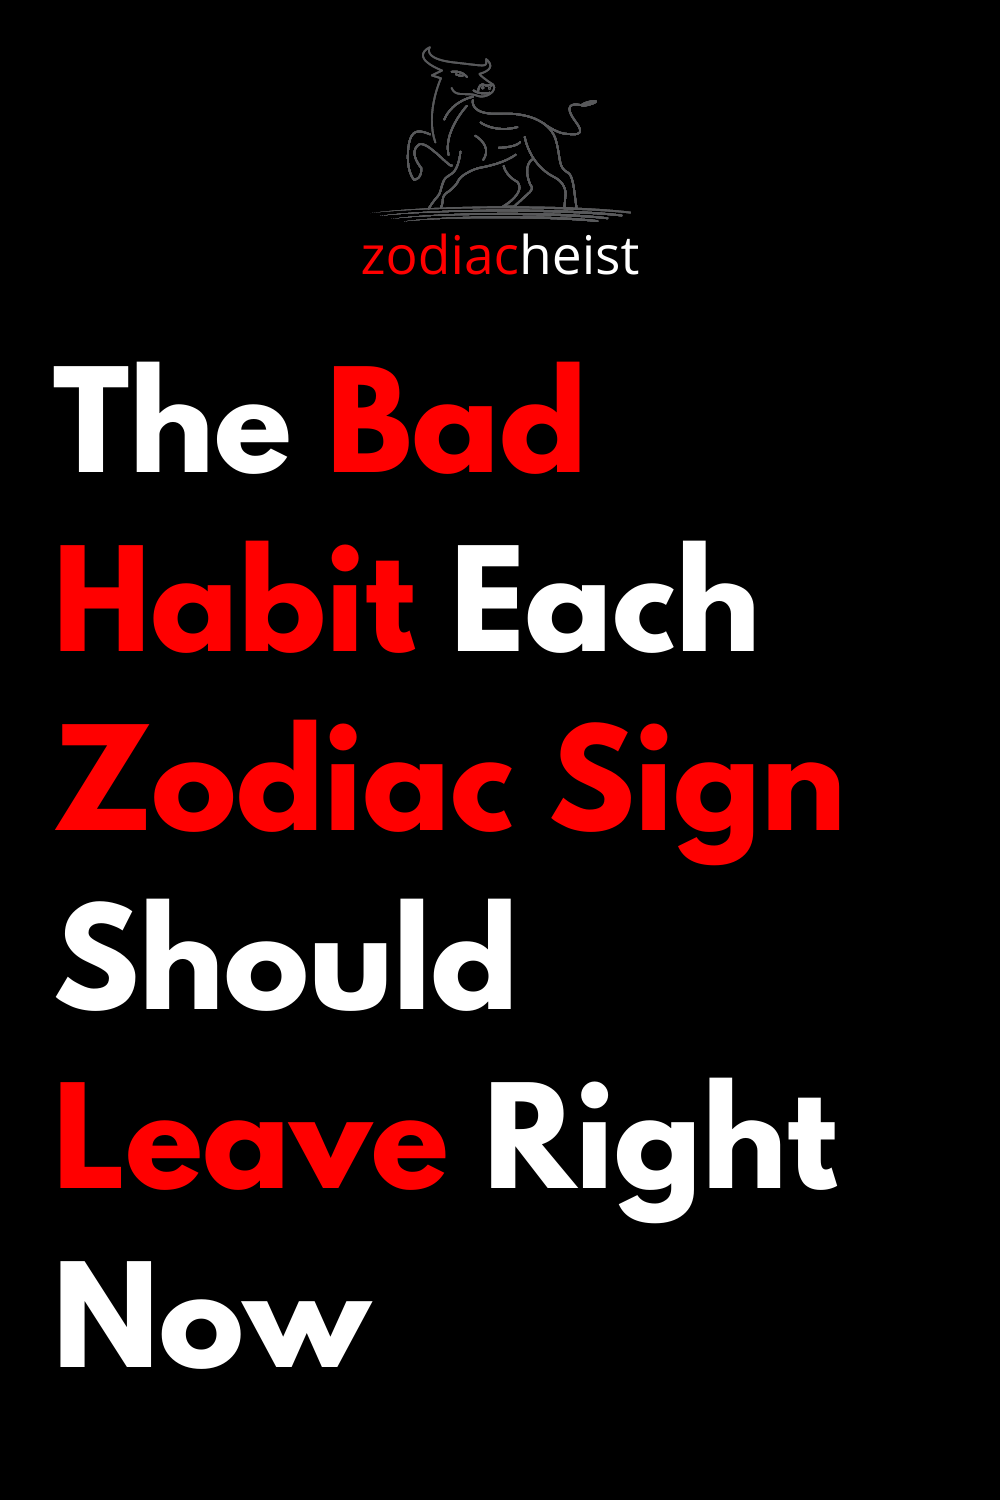 The Bad Habit Each Zodiac Sign Should Leave Right Now